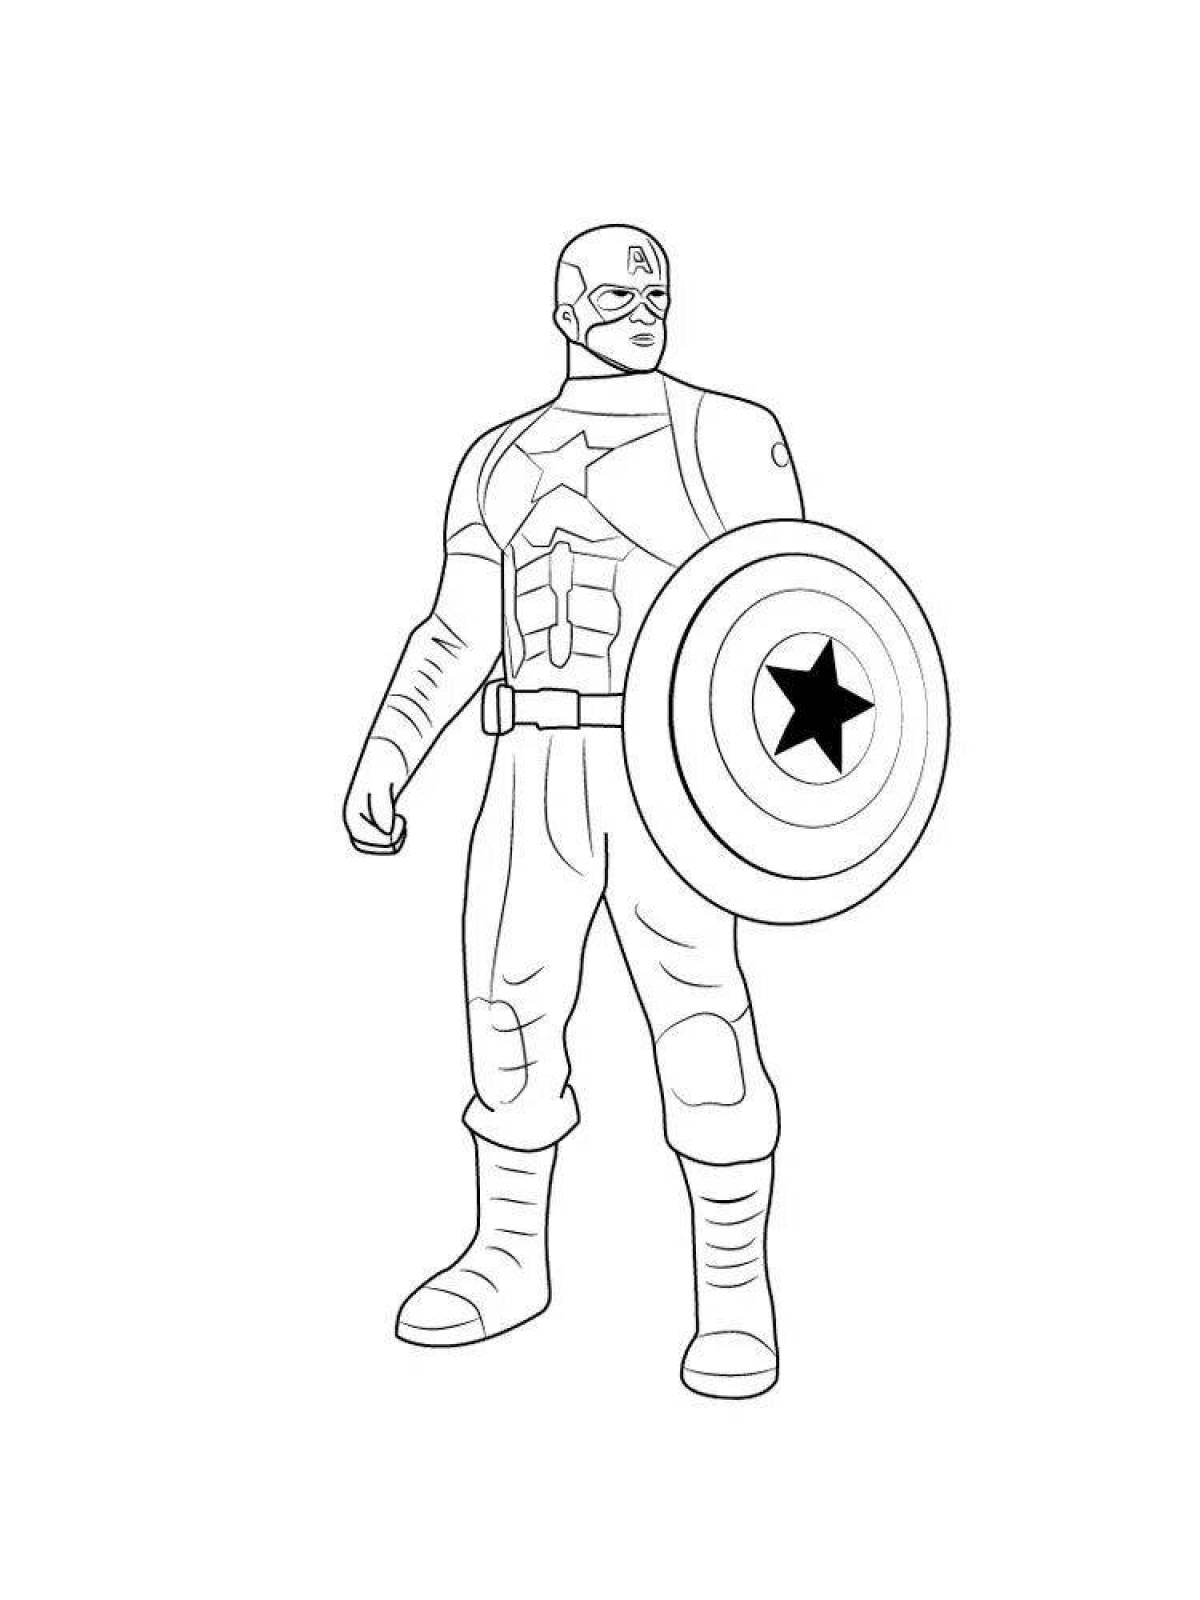 Captain America bright coloring for kids